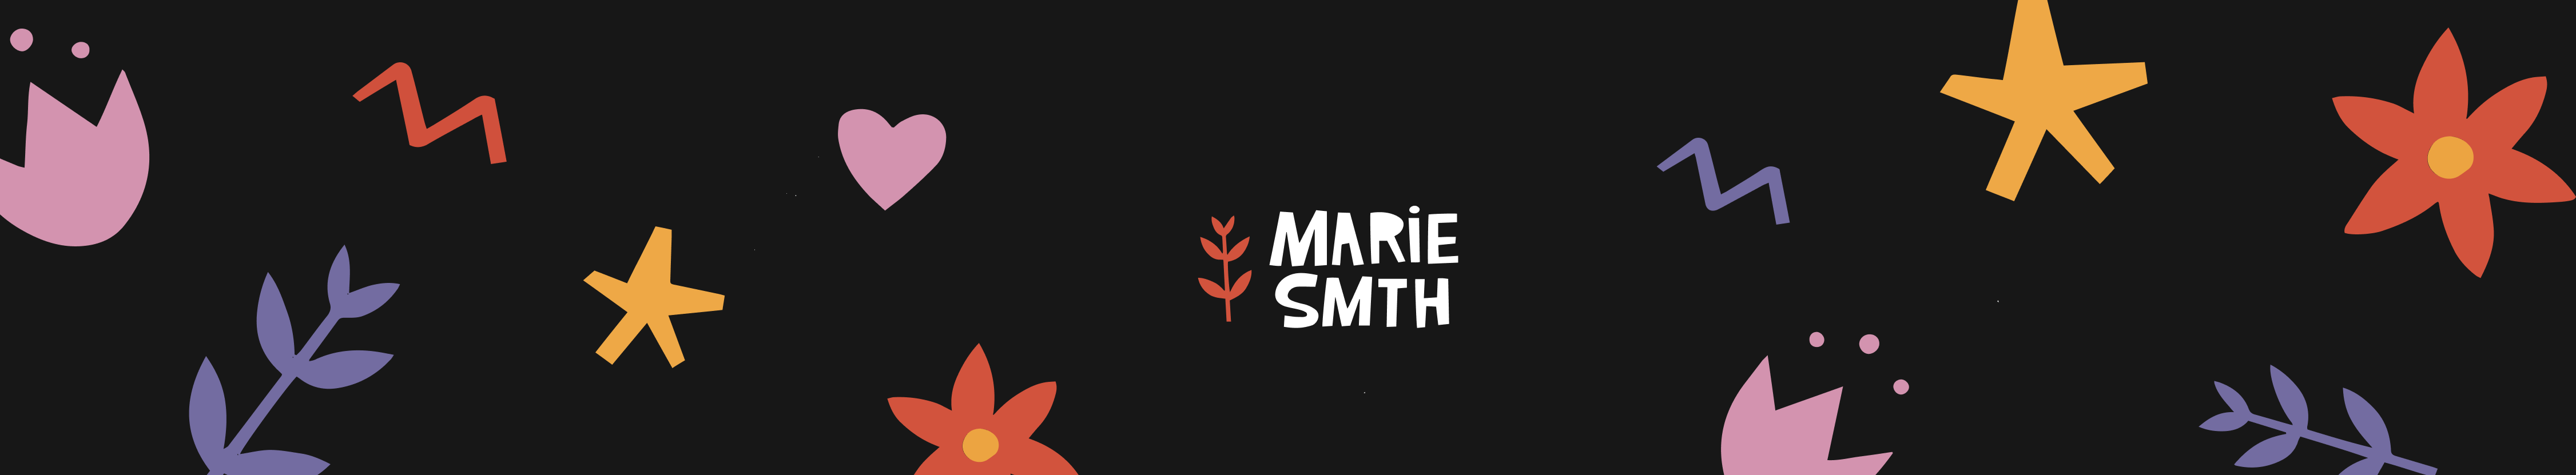 Marie Smth's profile banner